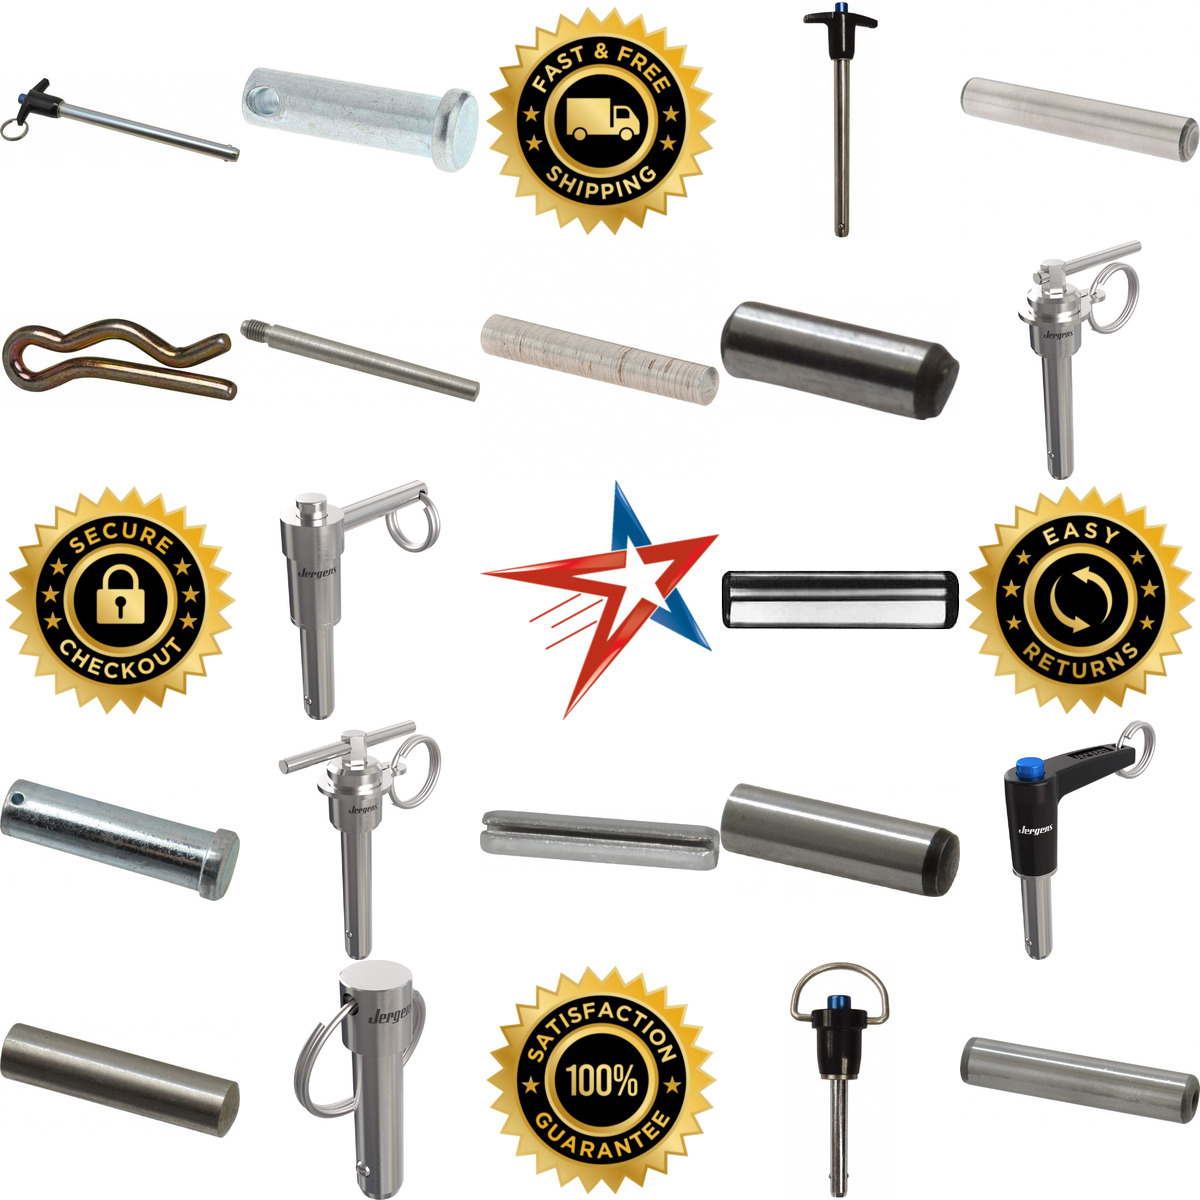 A selection of Pins and Clips products on GoVets